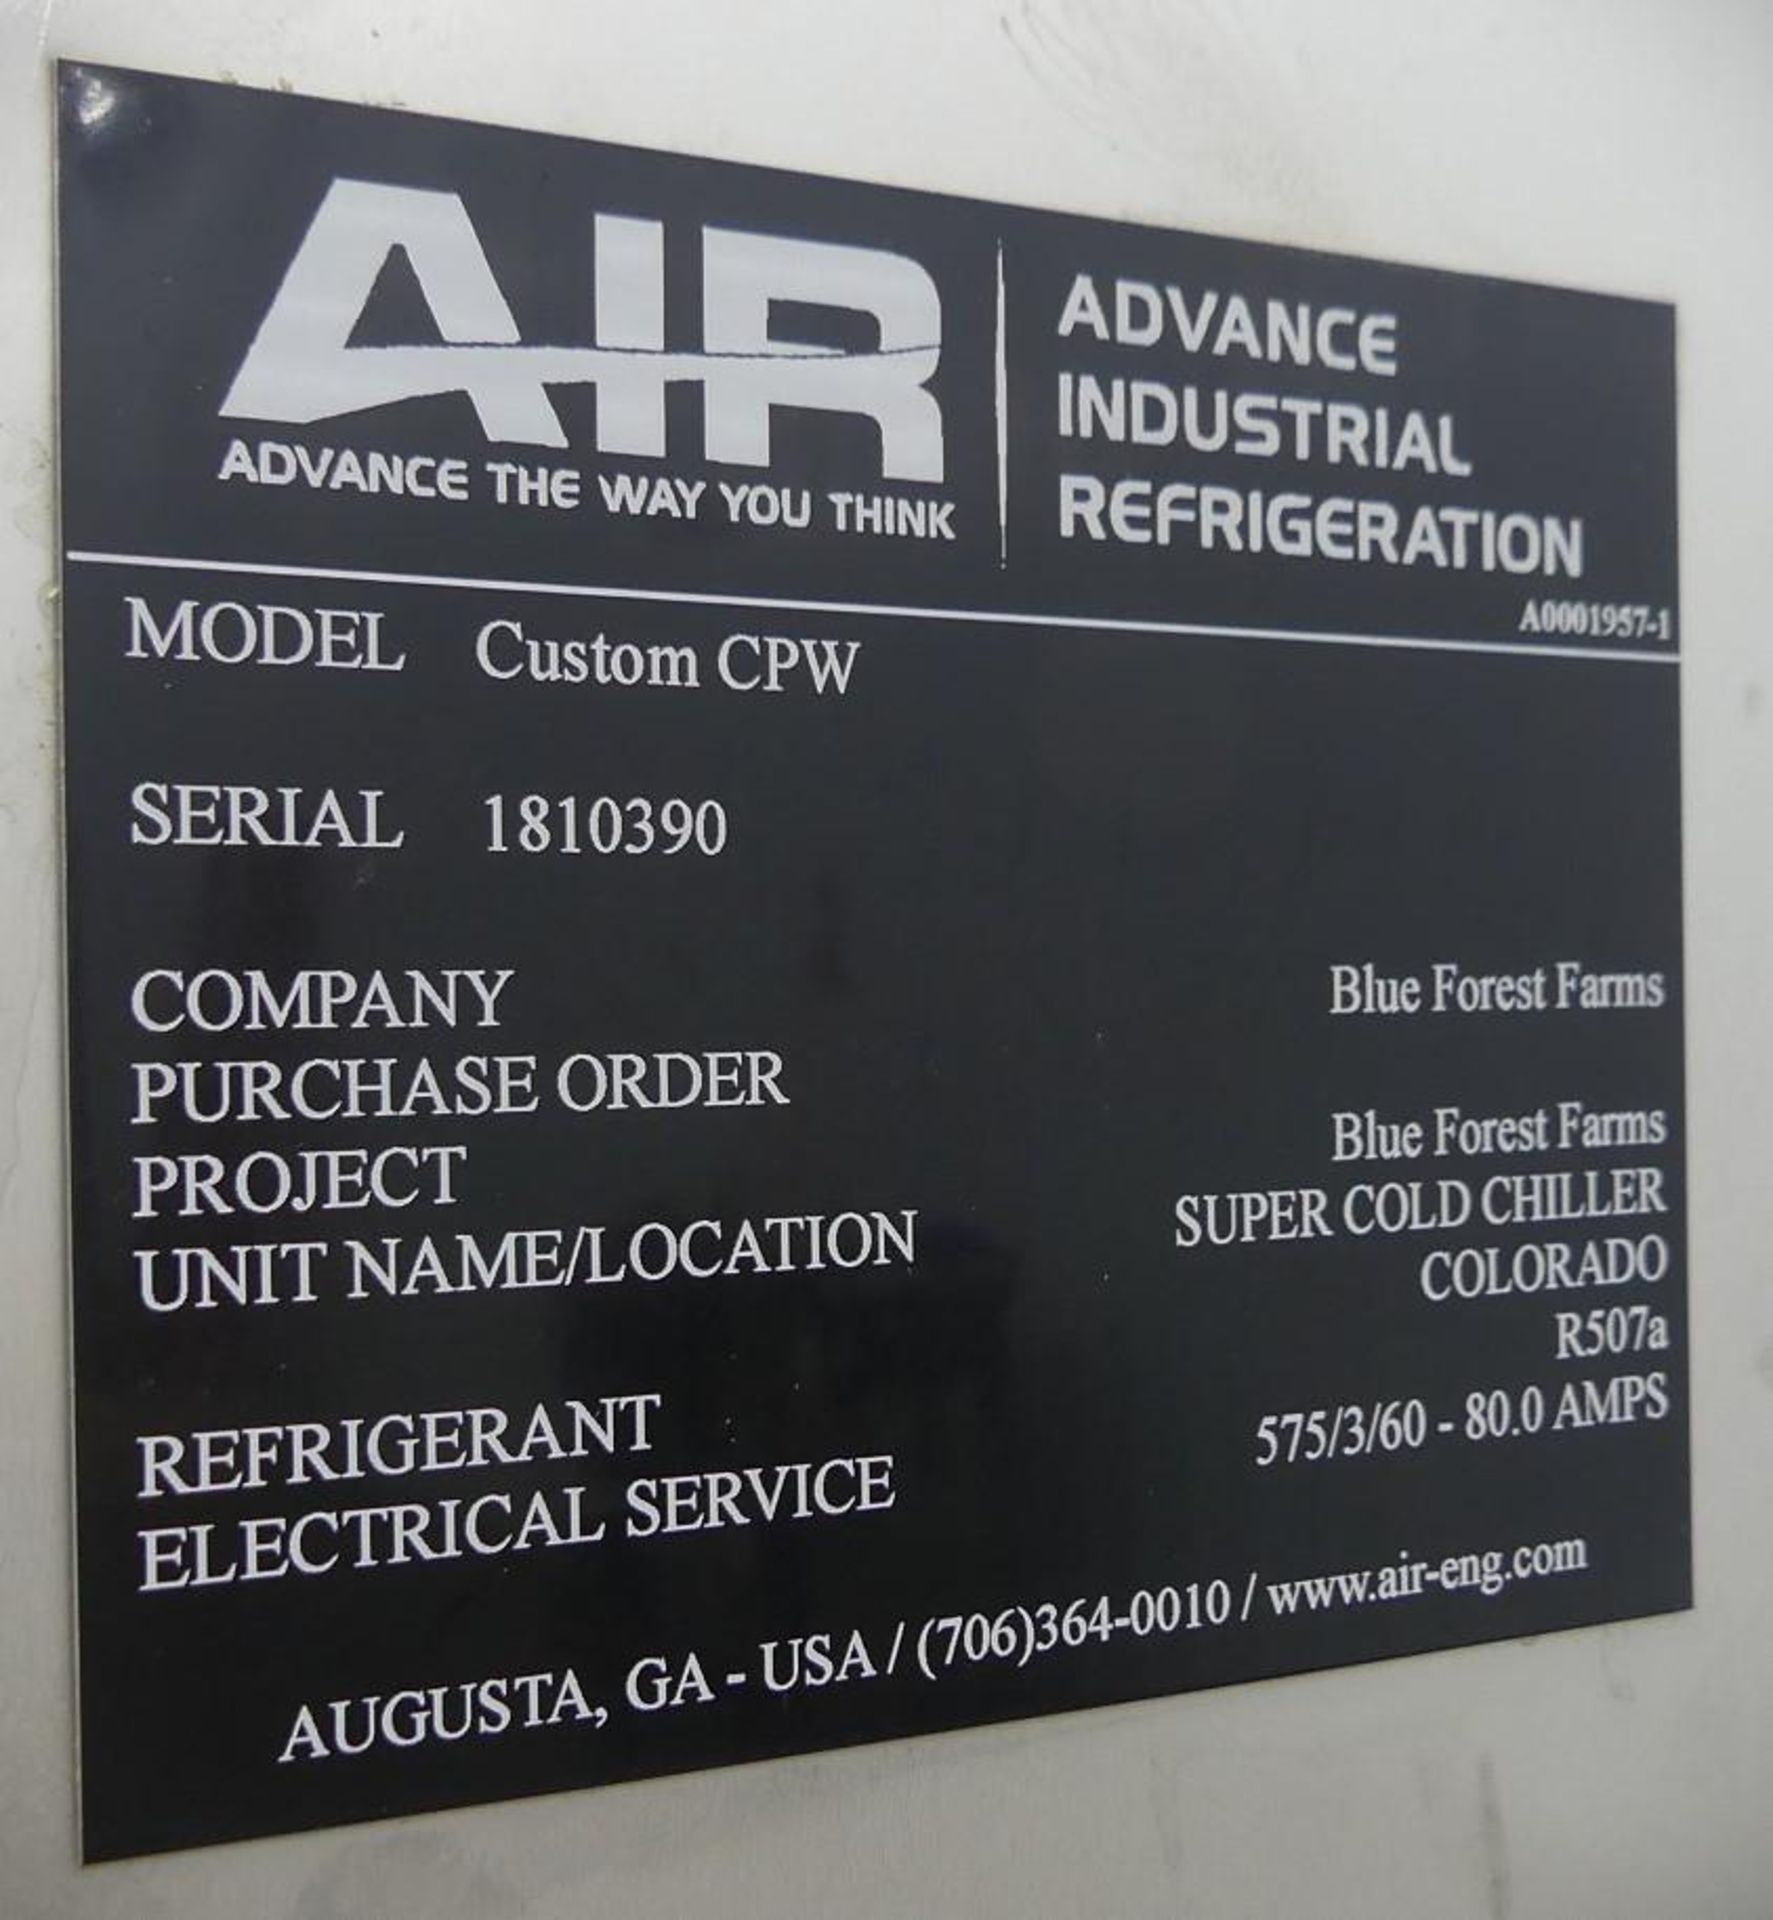 AIR Custom CPW Chiller - Image 51 of 52